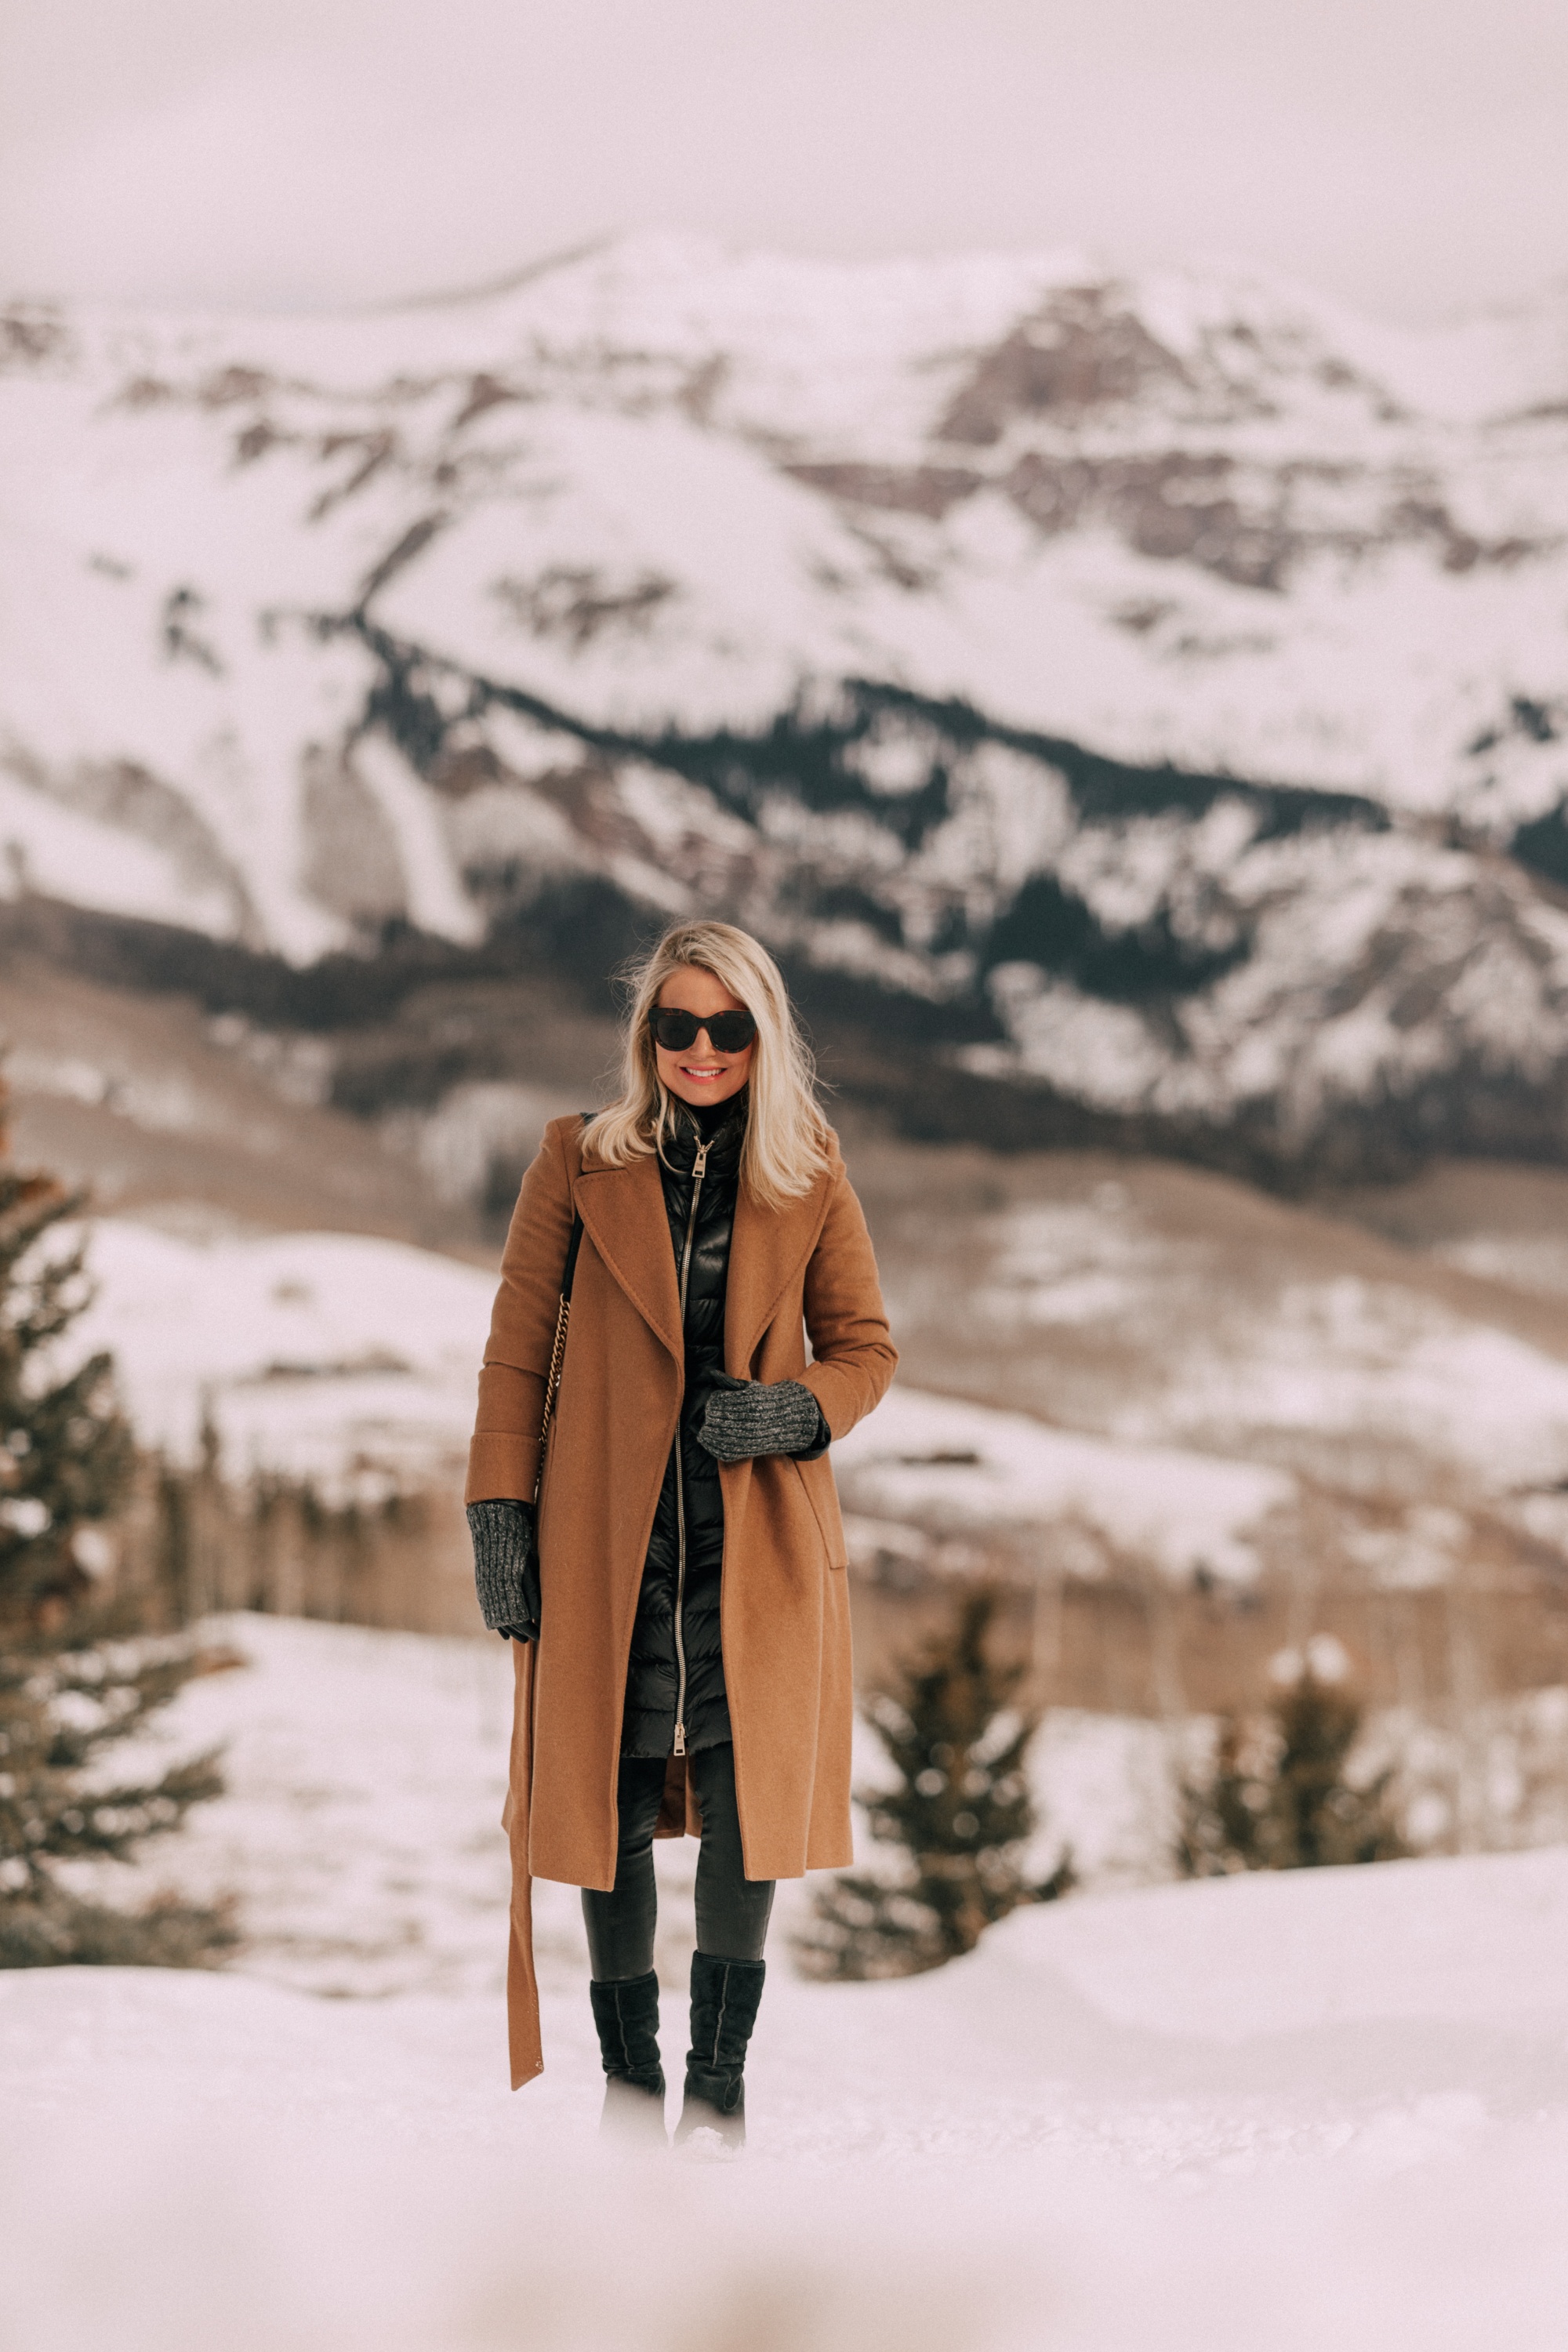 how to layer winter clothes to stay warm and look stylish, cold weather outfit black turtleneck sweater Citizens of Humanity Rocket leatherette skinny jeans, Ugg wedge boots, camel wool Mackage coat Mackage, and Herno puffer coat in Telluride, CO